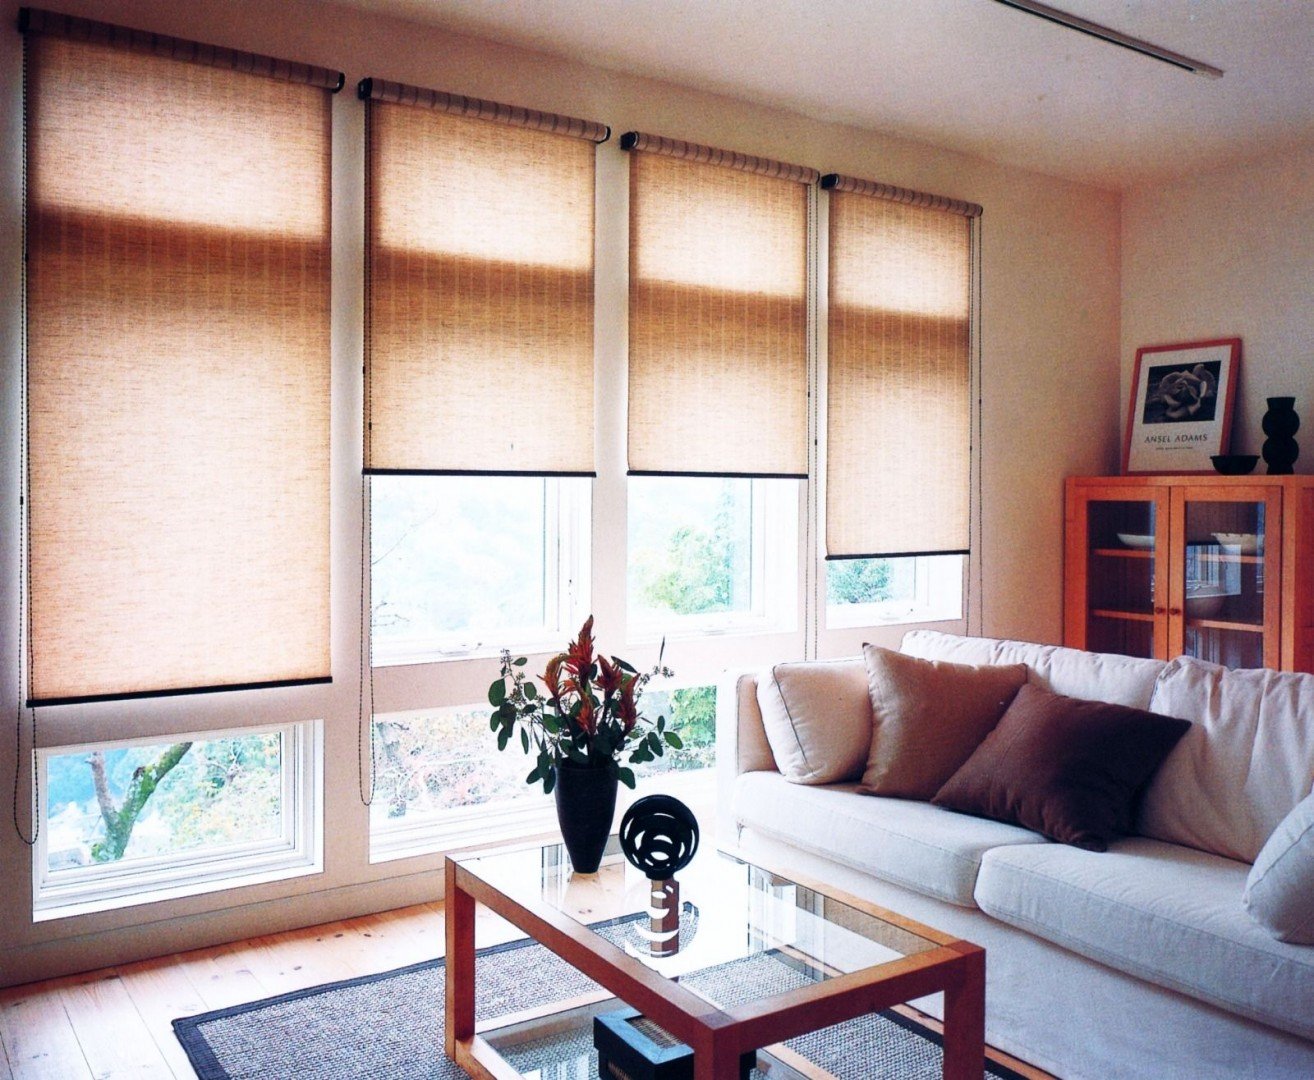 Rolle - Heavy Duty Interior Roller Blinds from Sandei